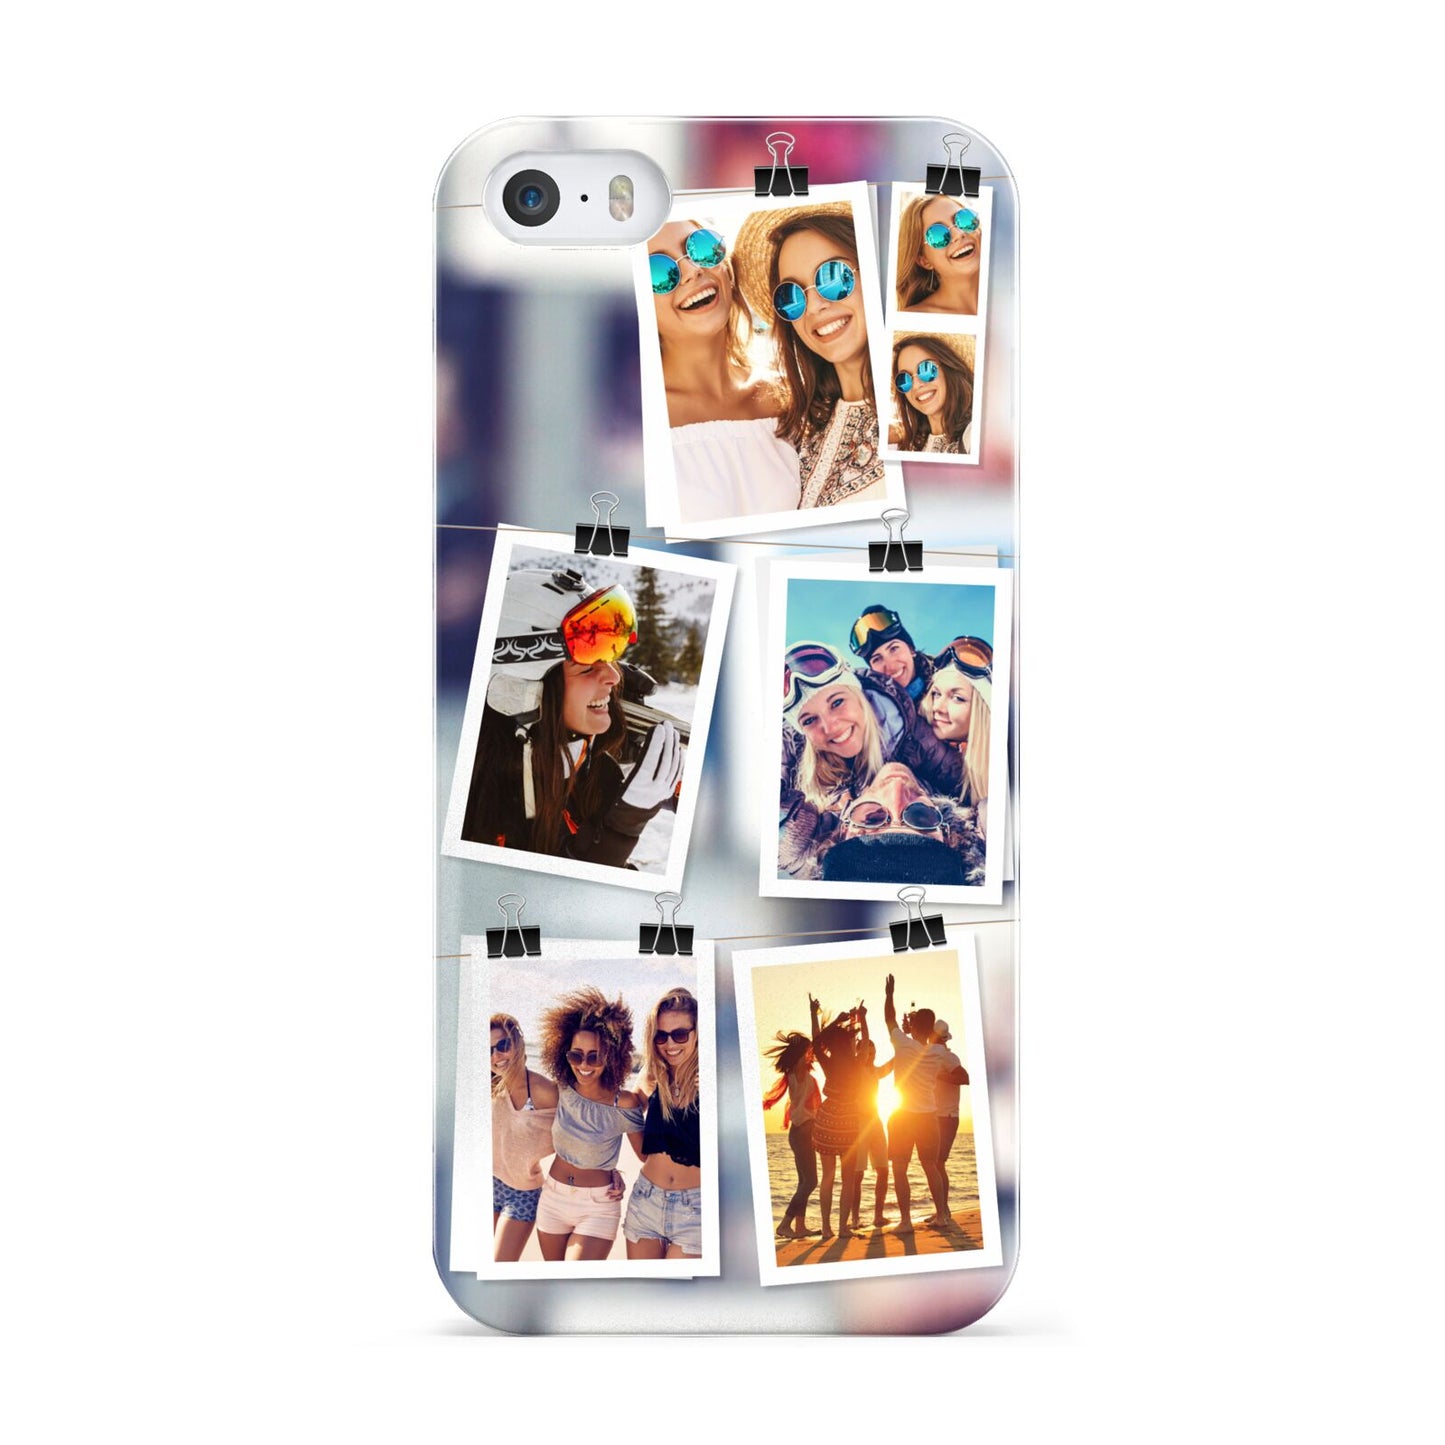 Photo Wall Montage Upload Apple iPhone 5 Case